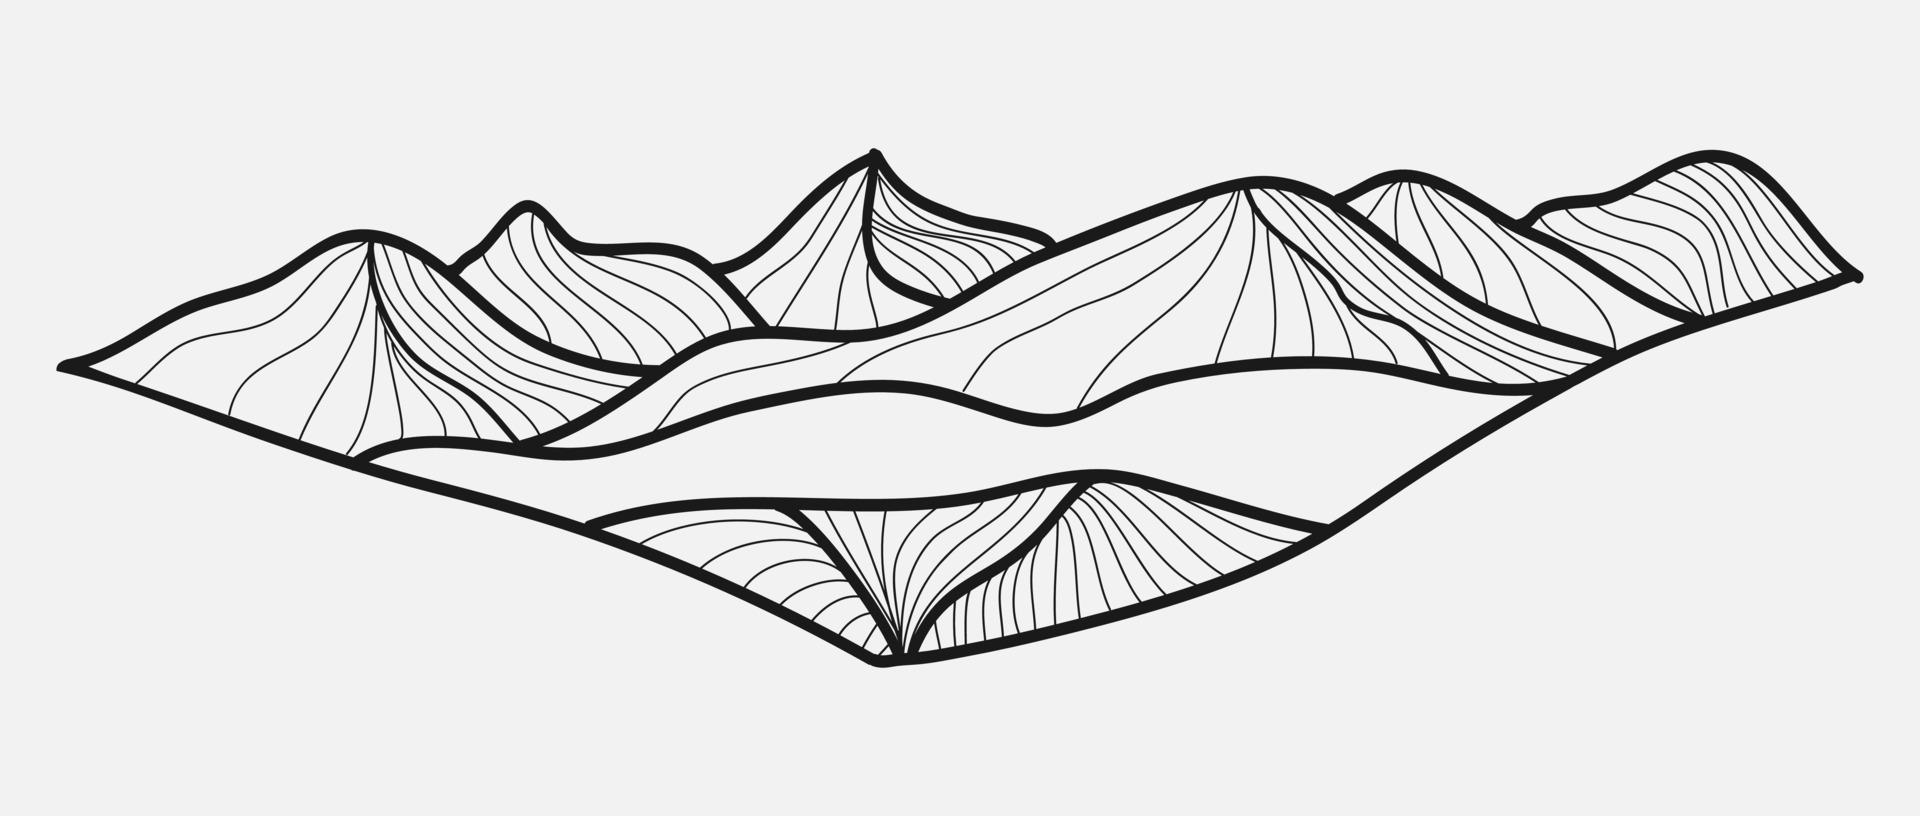 Mountain line art. Abstract mountain template with geometric pattern. design for print, cover, invitation background, fabric. Vector illustration. Vector illustration